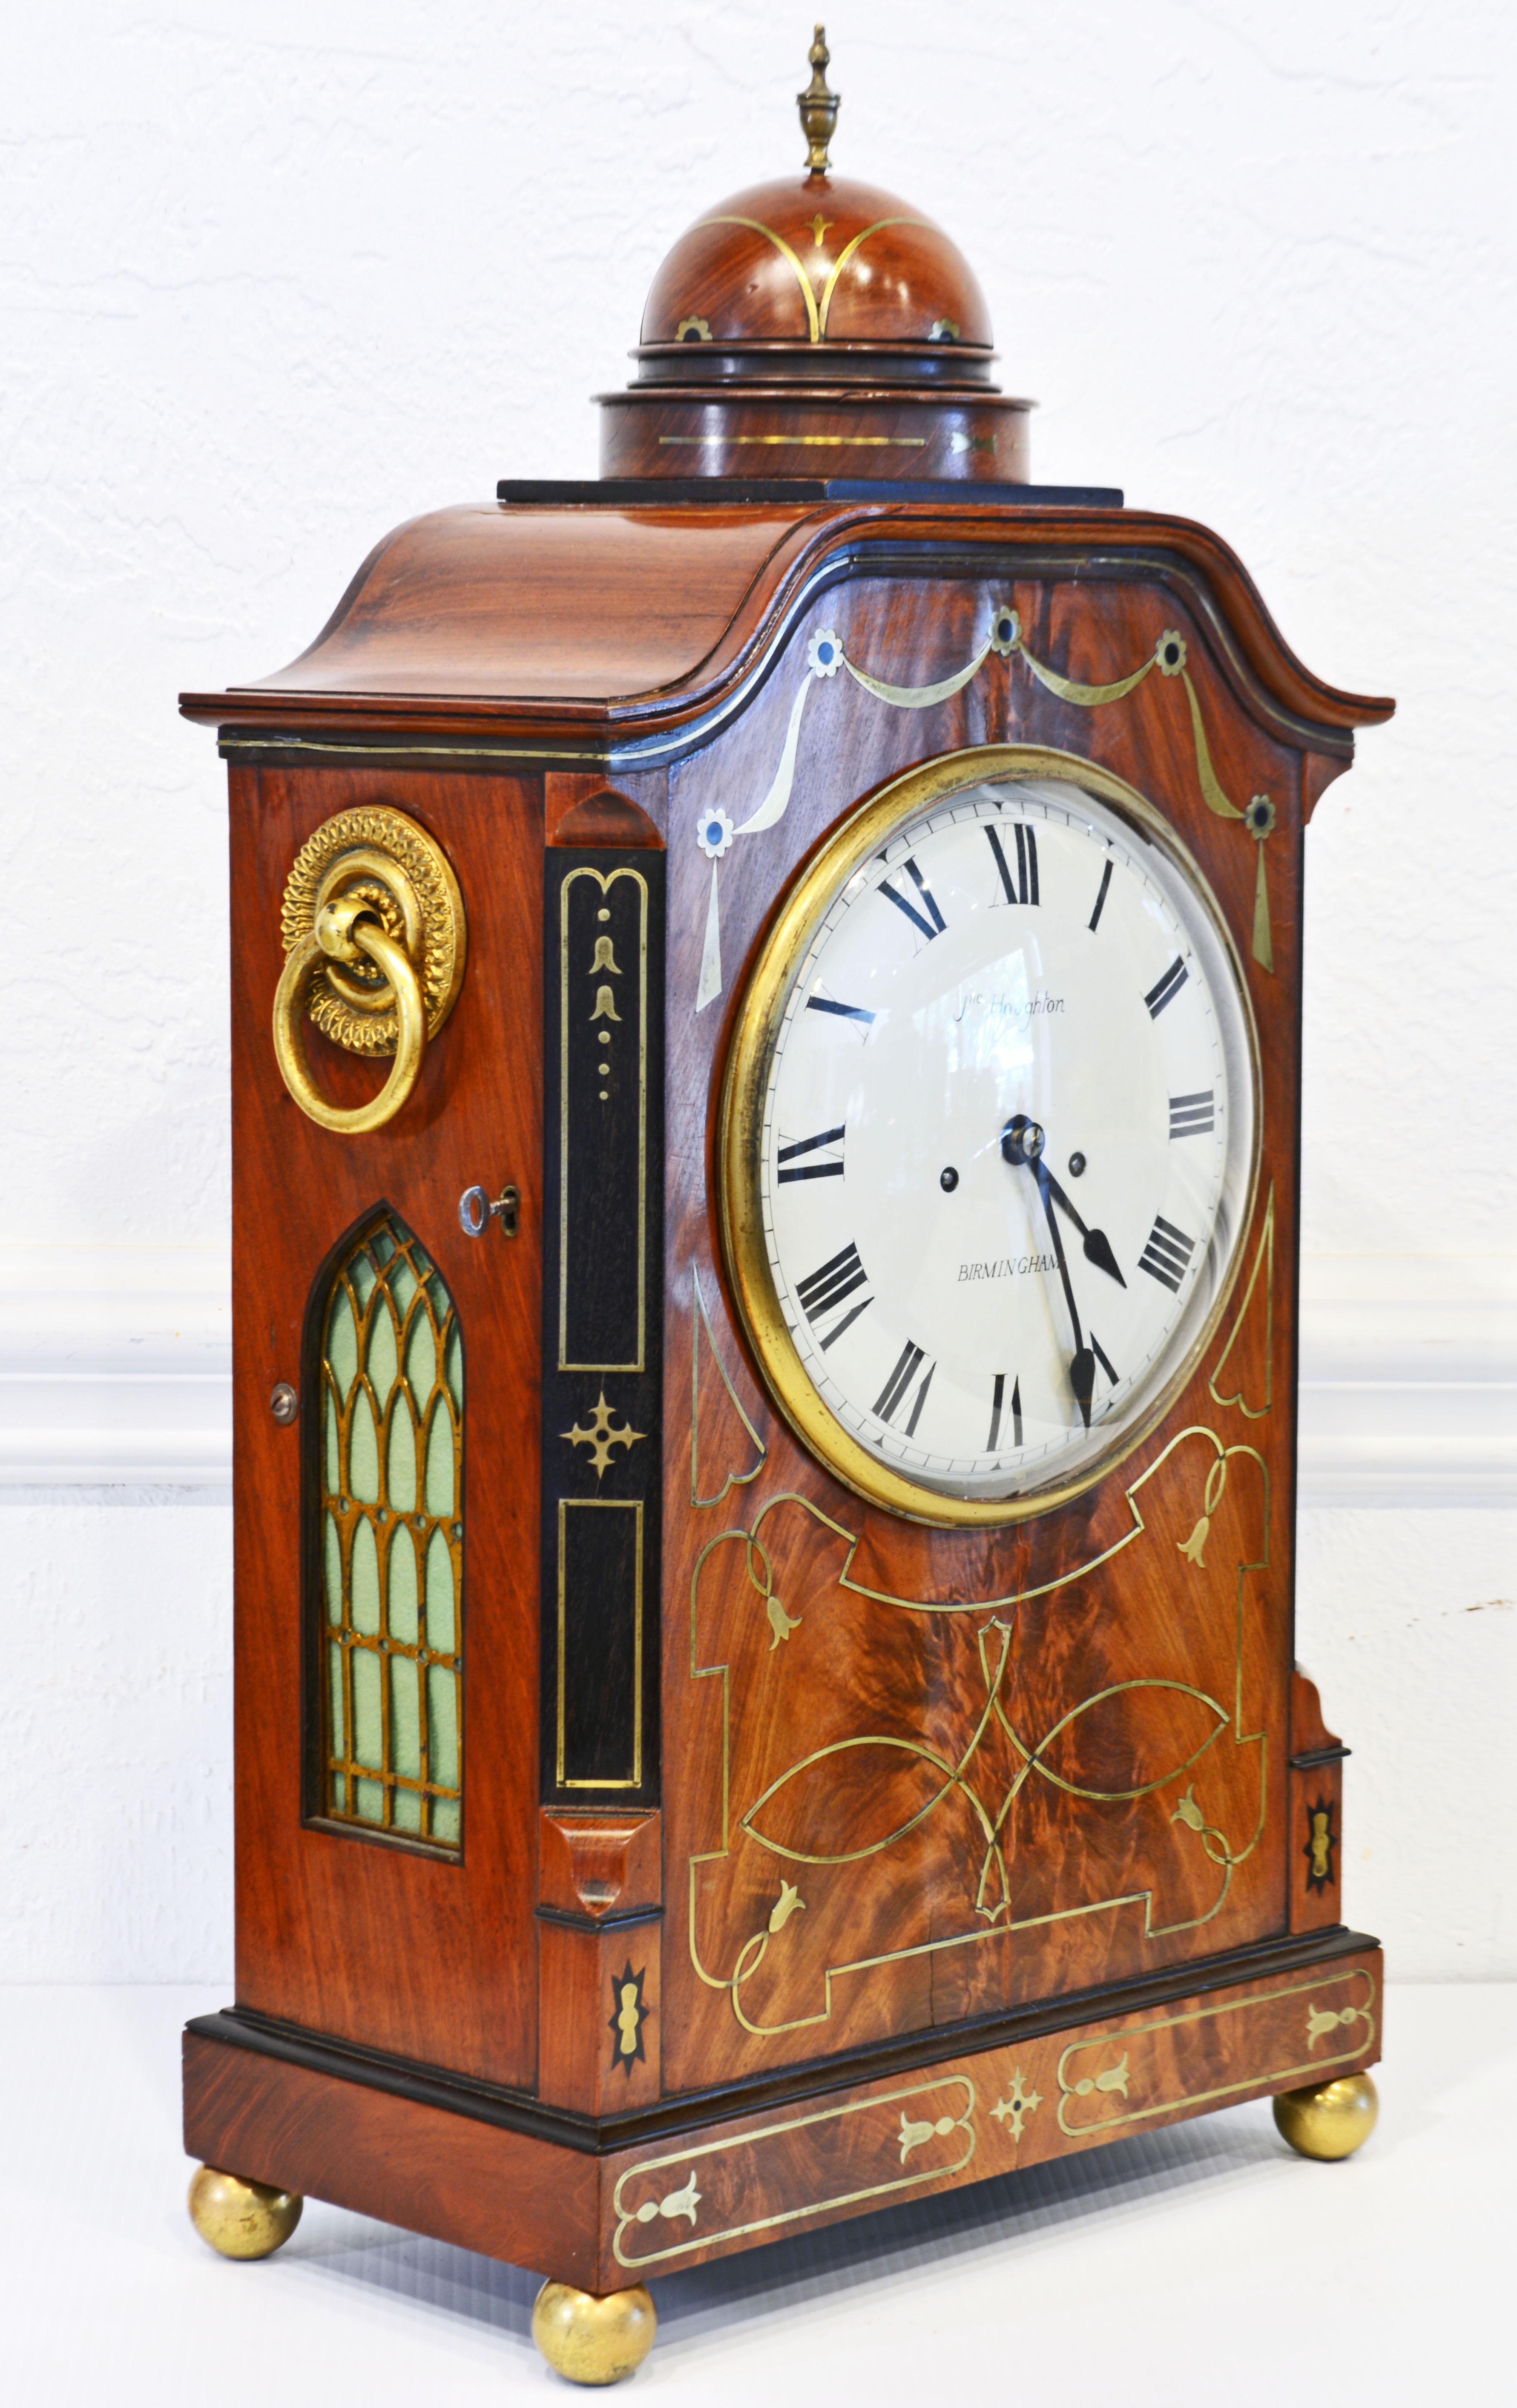 This elegant Regency mahogany Mantle clock features a domed top with brass finial on a bell shaped case top. The case sports a brass framed glass door with lock opening up to a white dial with Roman numerals and inscribed with maker's name and